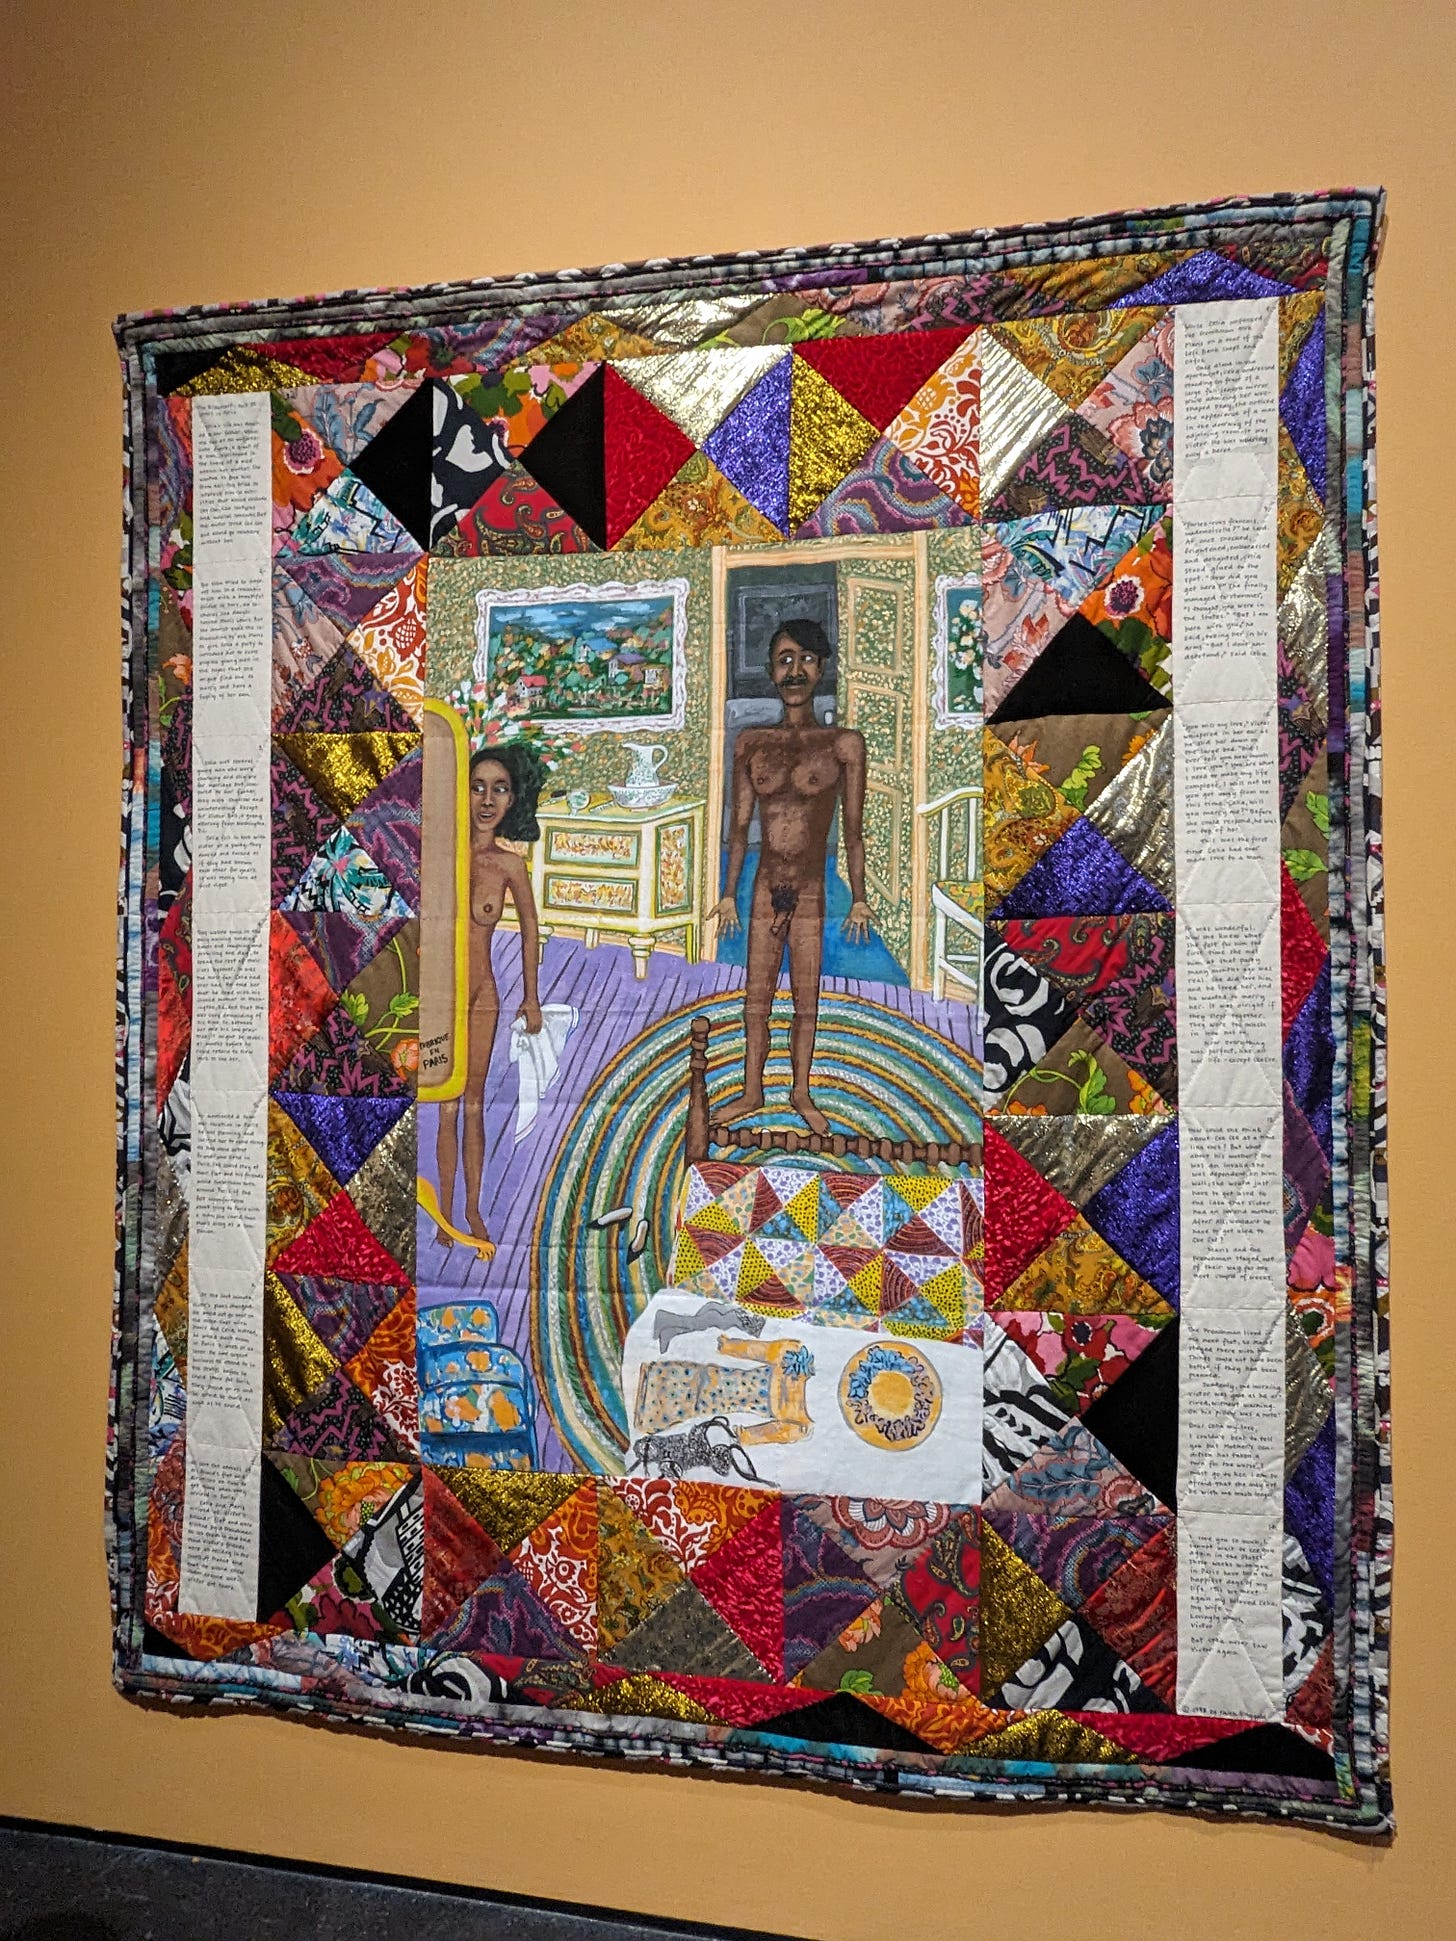 A quilt haging against a yellow wall. Diamond shaped prints run along the quilt next to text written by the artist. In the center is a naked Black man standing in front of a Black woman 